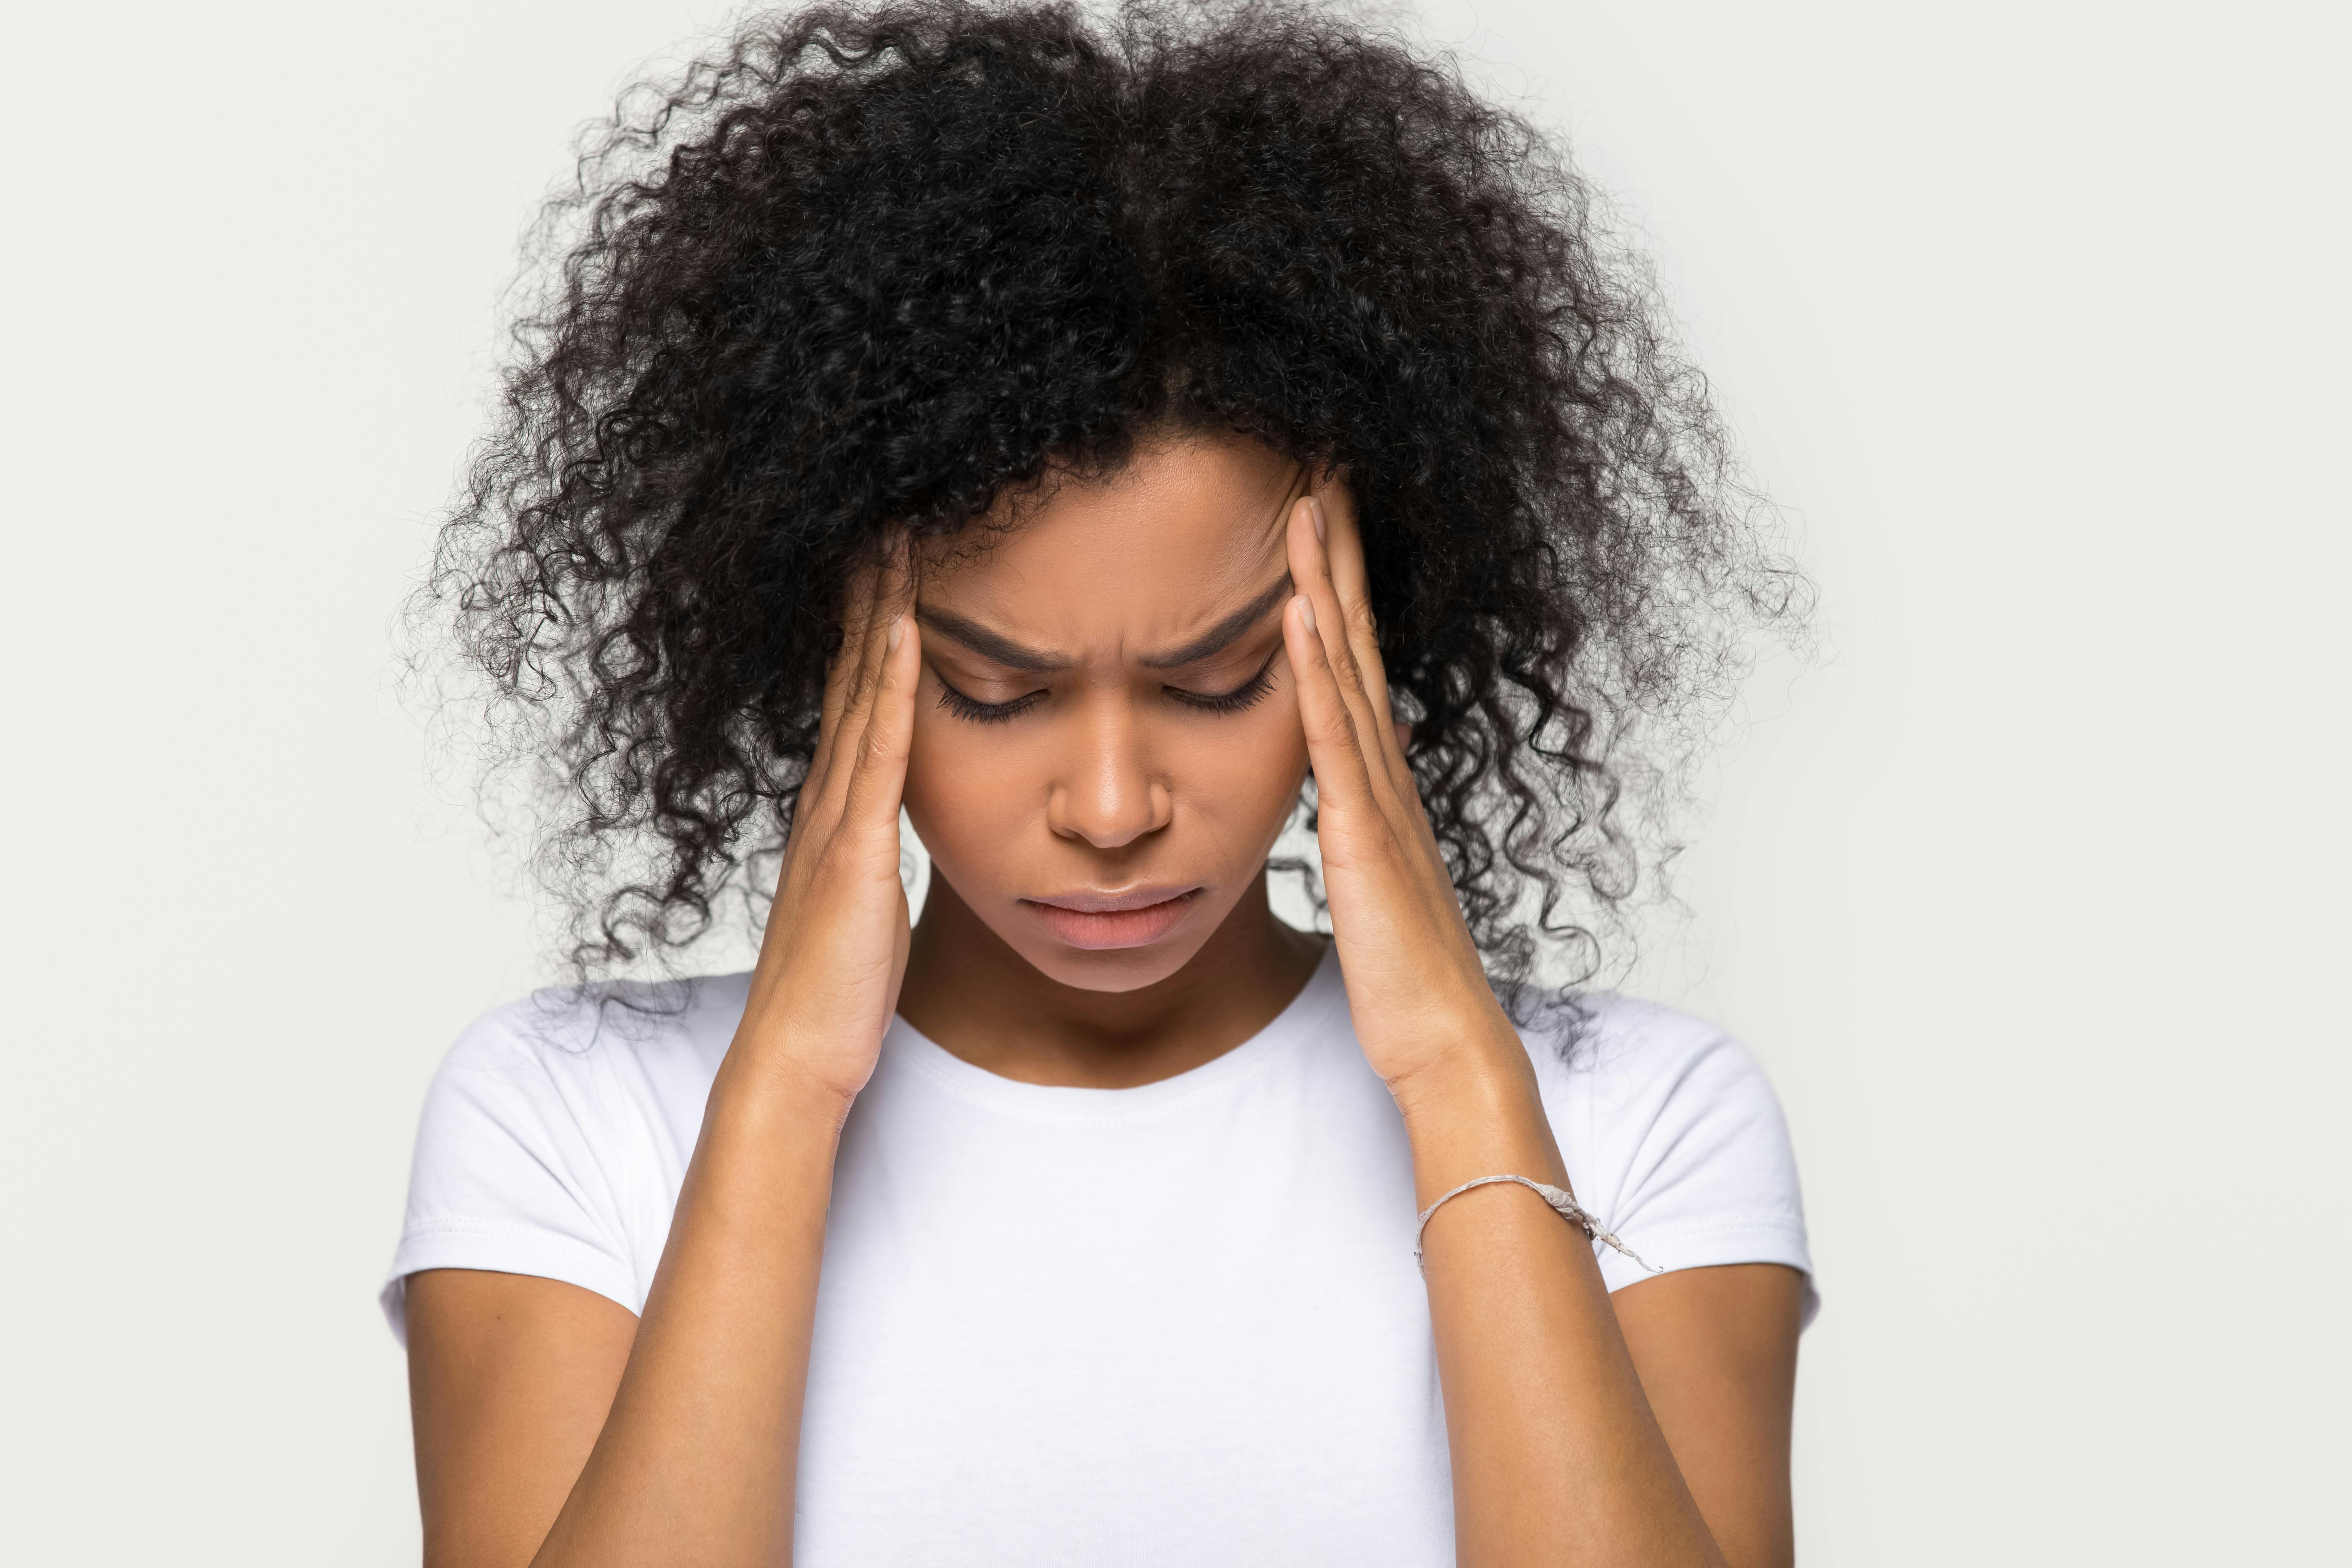 Woman suffering from a tension headache presses her hands to her head